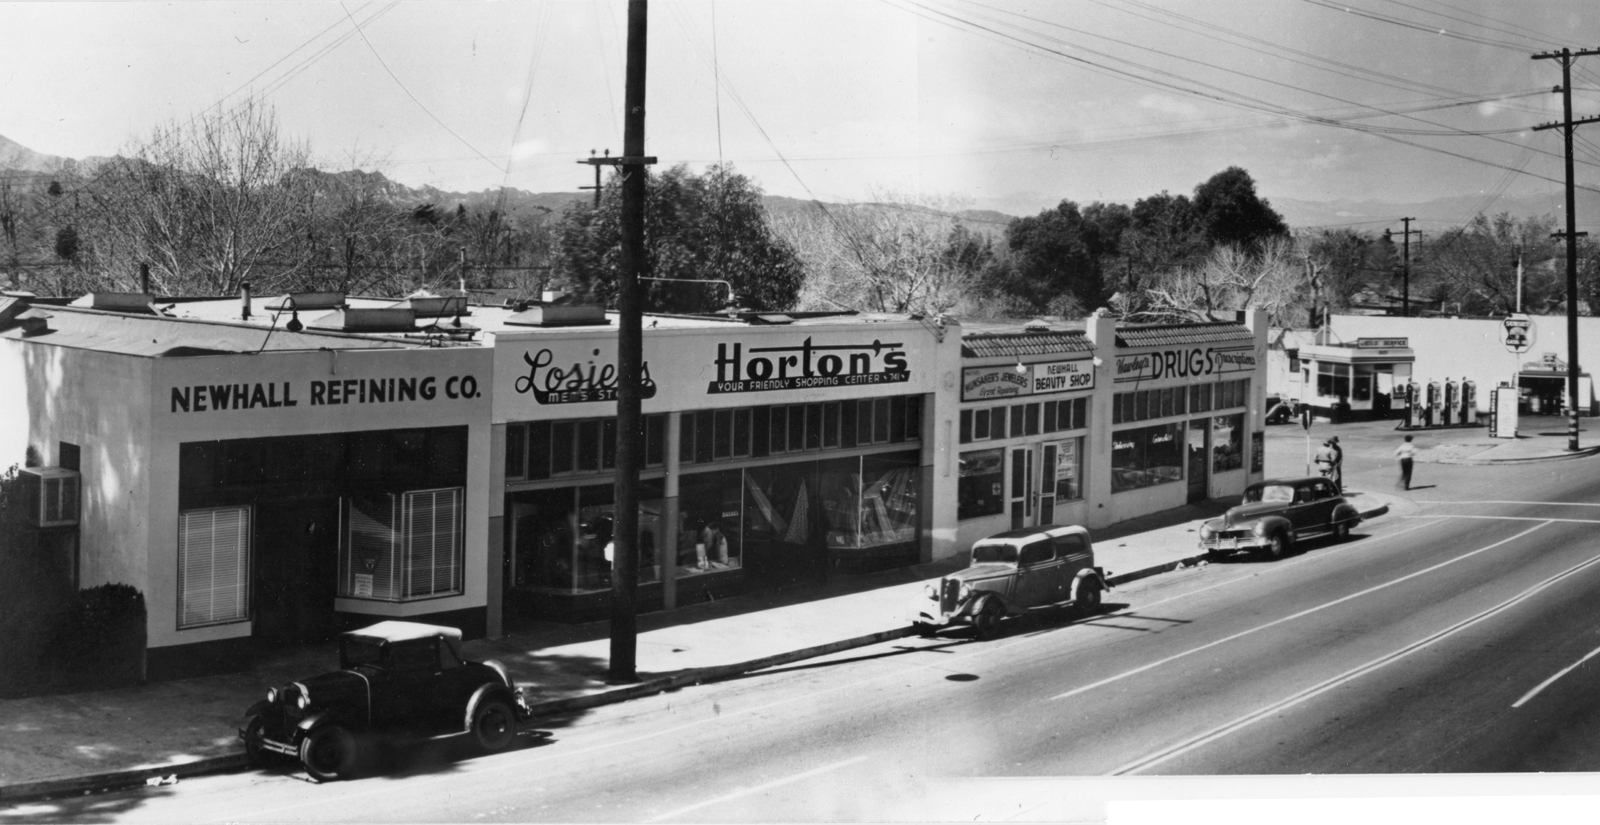 SCVHistory.com AP2722 | Newhall | Newhall Refining, Losier's, Horton's